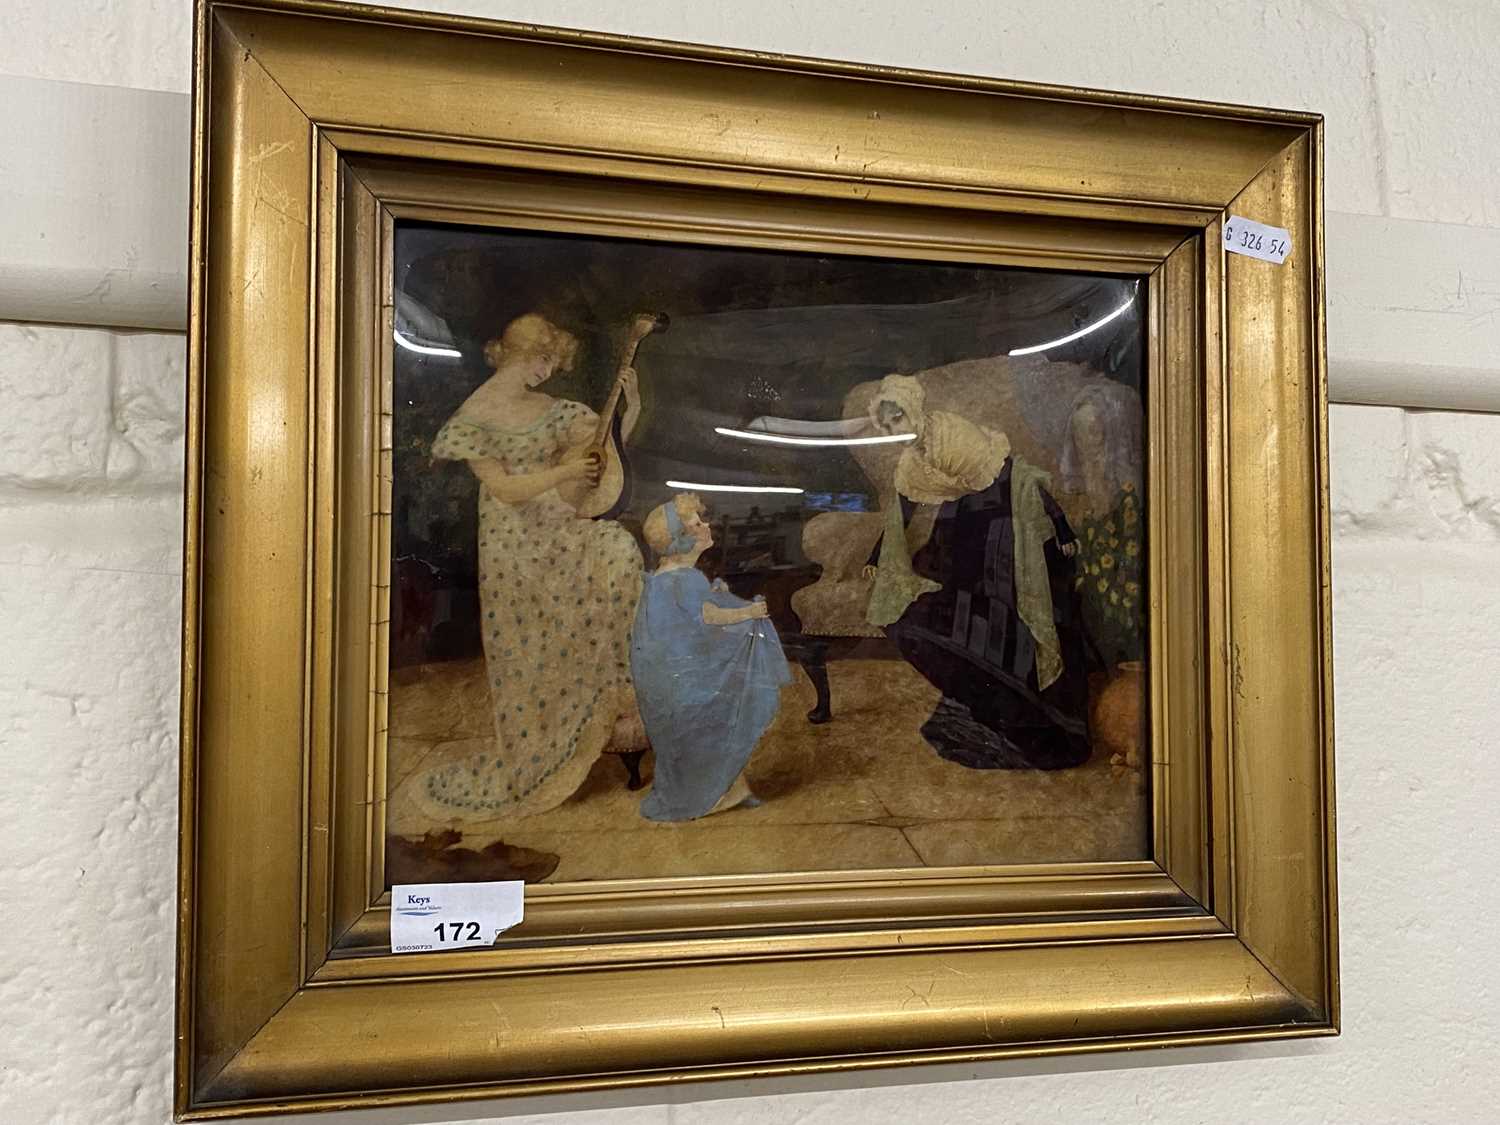 Victorian Crystoleum showing an interior scene with figures, set in a gilt frame